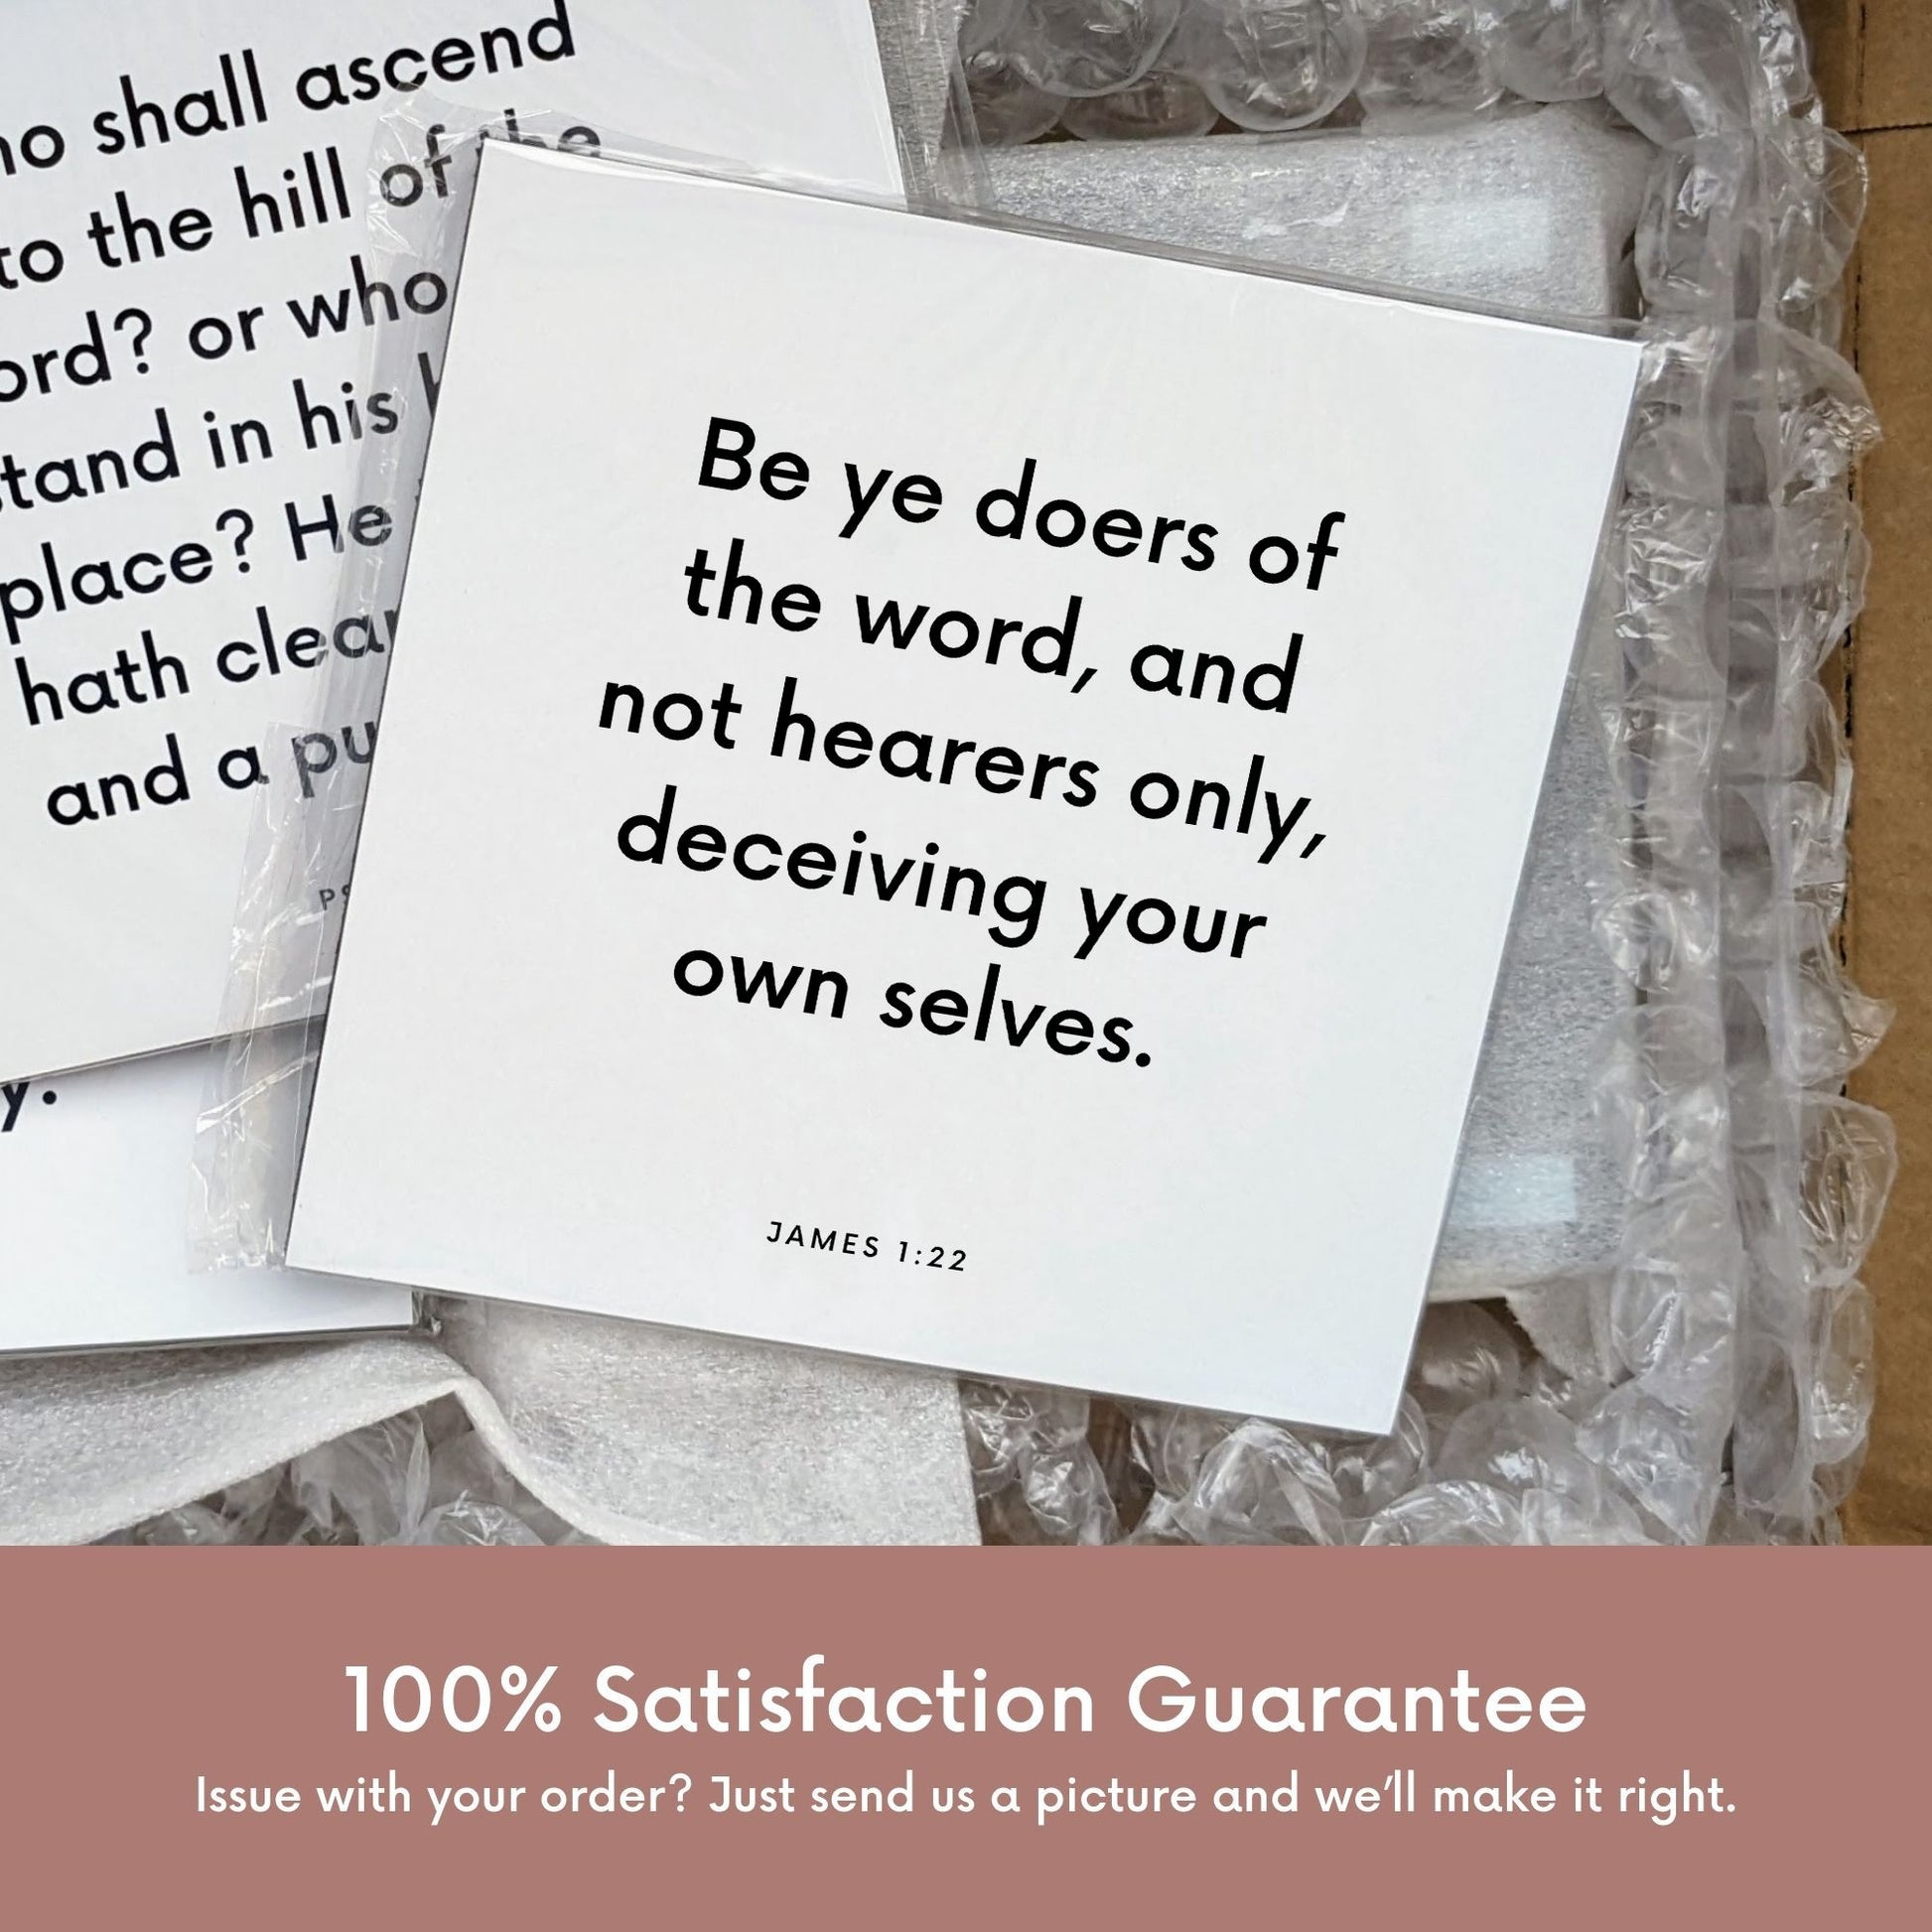 Shipping materials for scripture tile of James 1:22 - "Be ye doers of the word, and not hearers only"